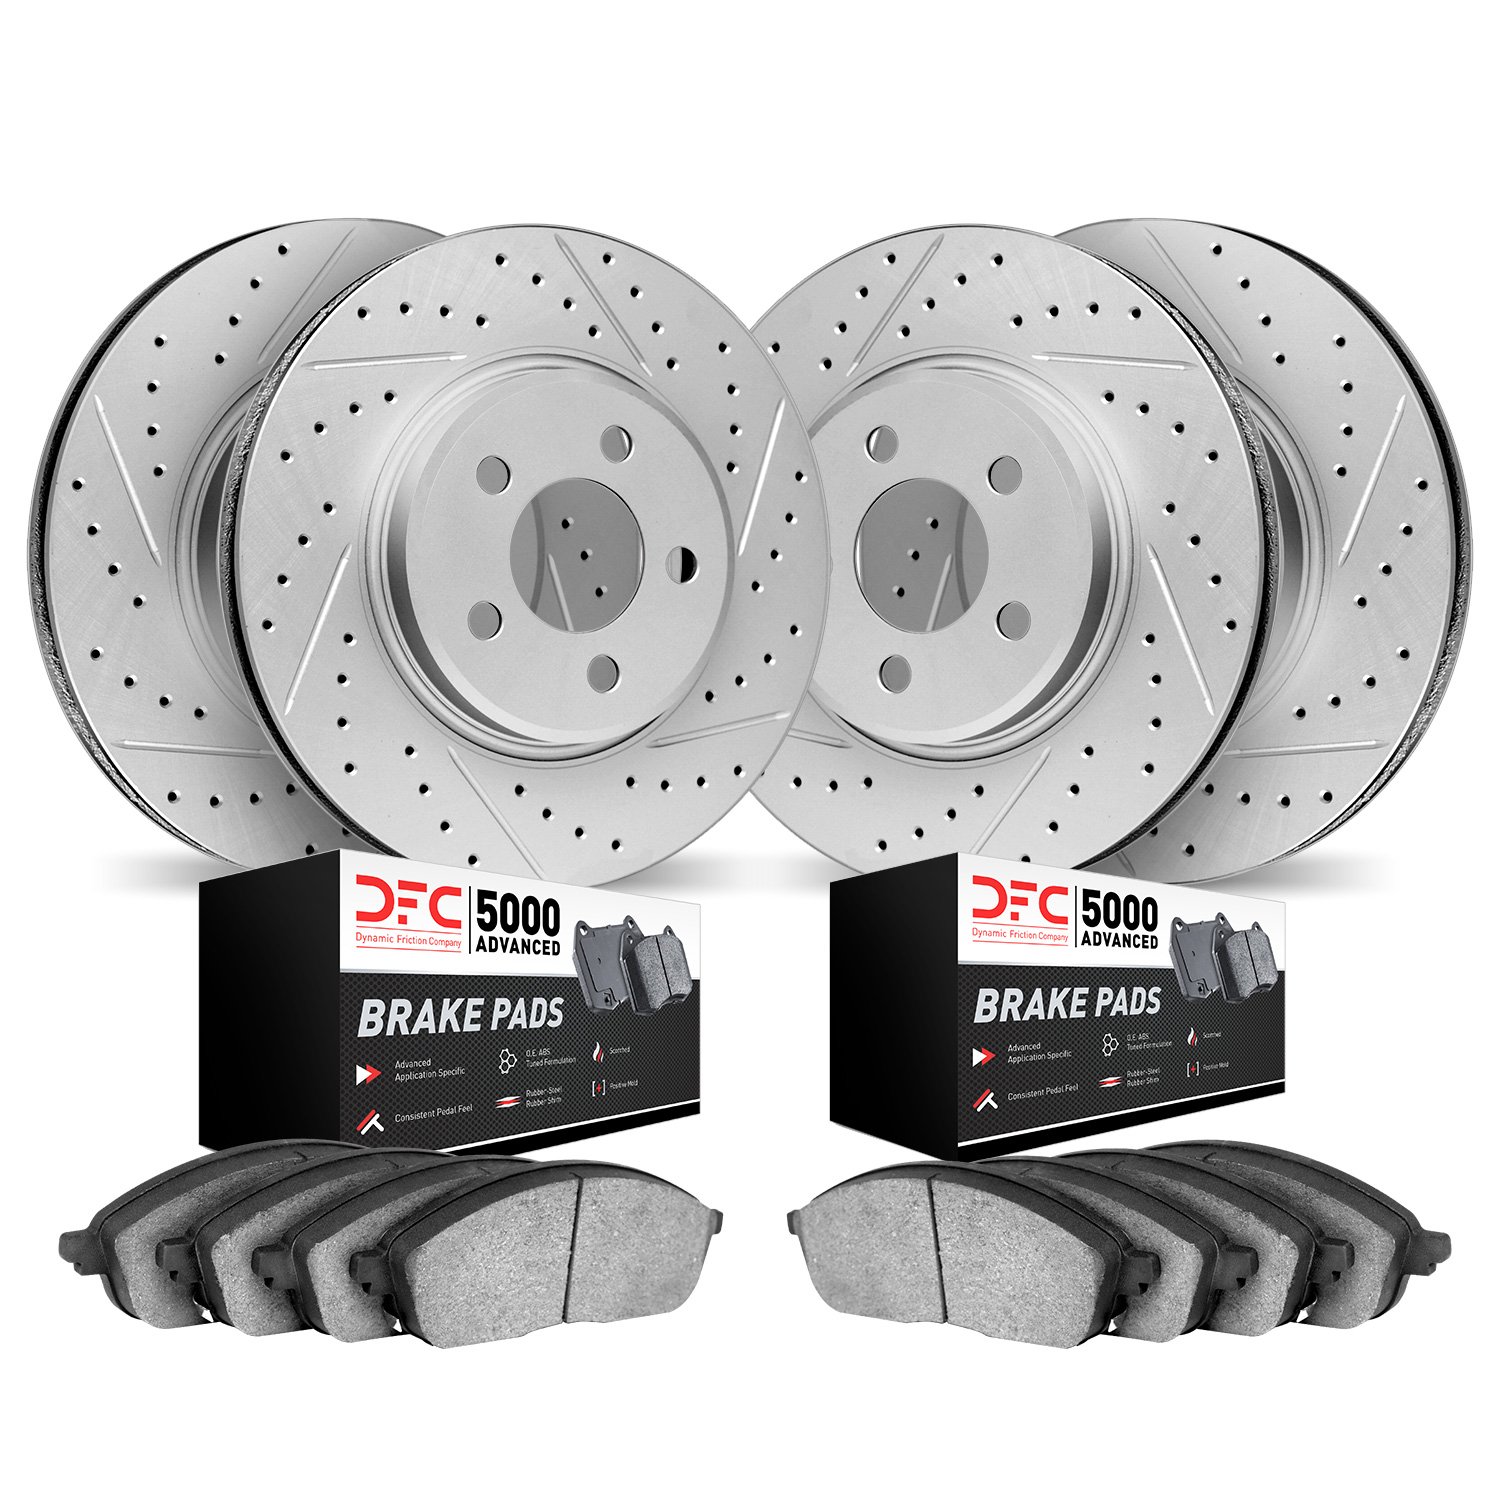 2504-13006 Geoperformance Drilled/Slotted Rotors w/5000 Advanced Brake Pads Kit, 2005-2007 Subaru, Position: Front and Rear